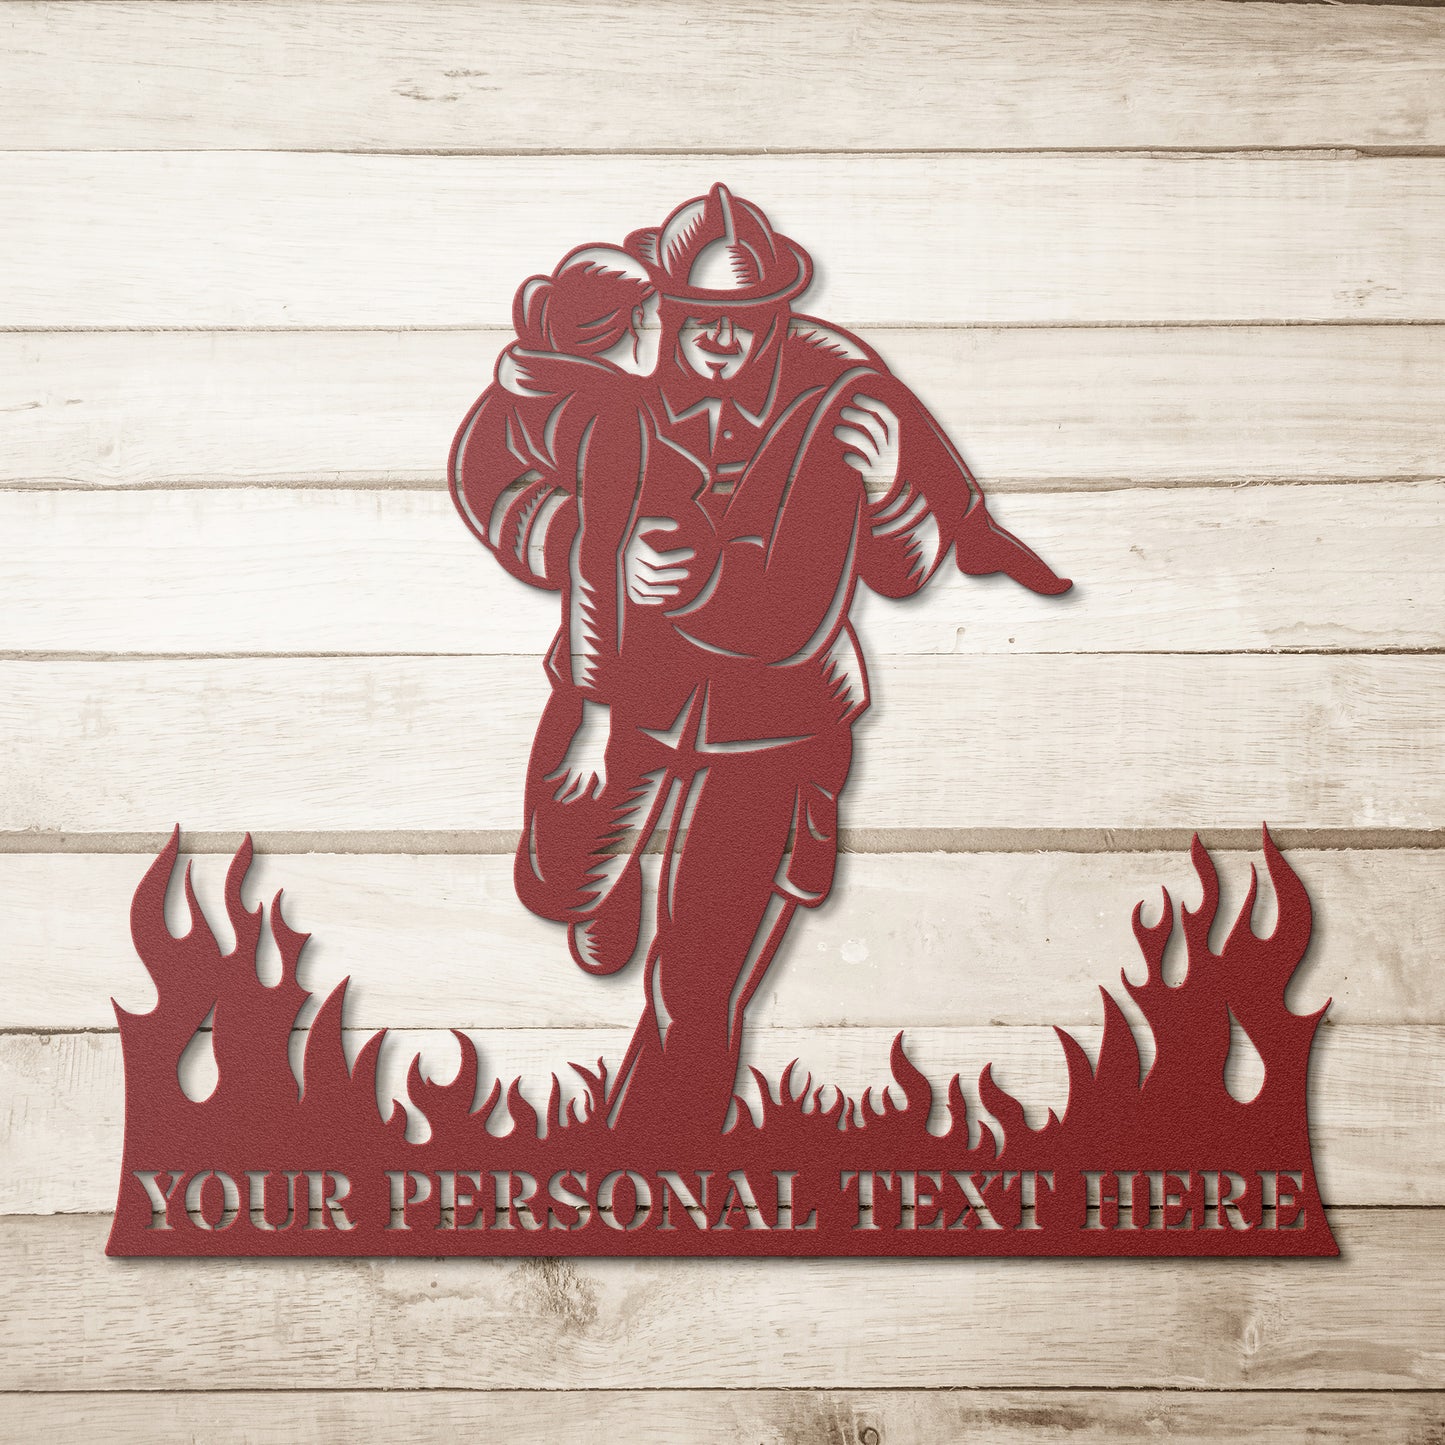 Personalized Firefighter Rescuing Name Metal Sign Gift. Custom Fireman Wall Hanging. Customize Firefighter Portrait Gift. To My Fireman Hero